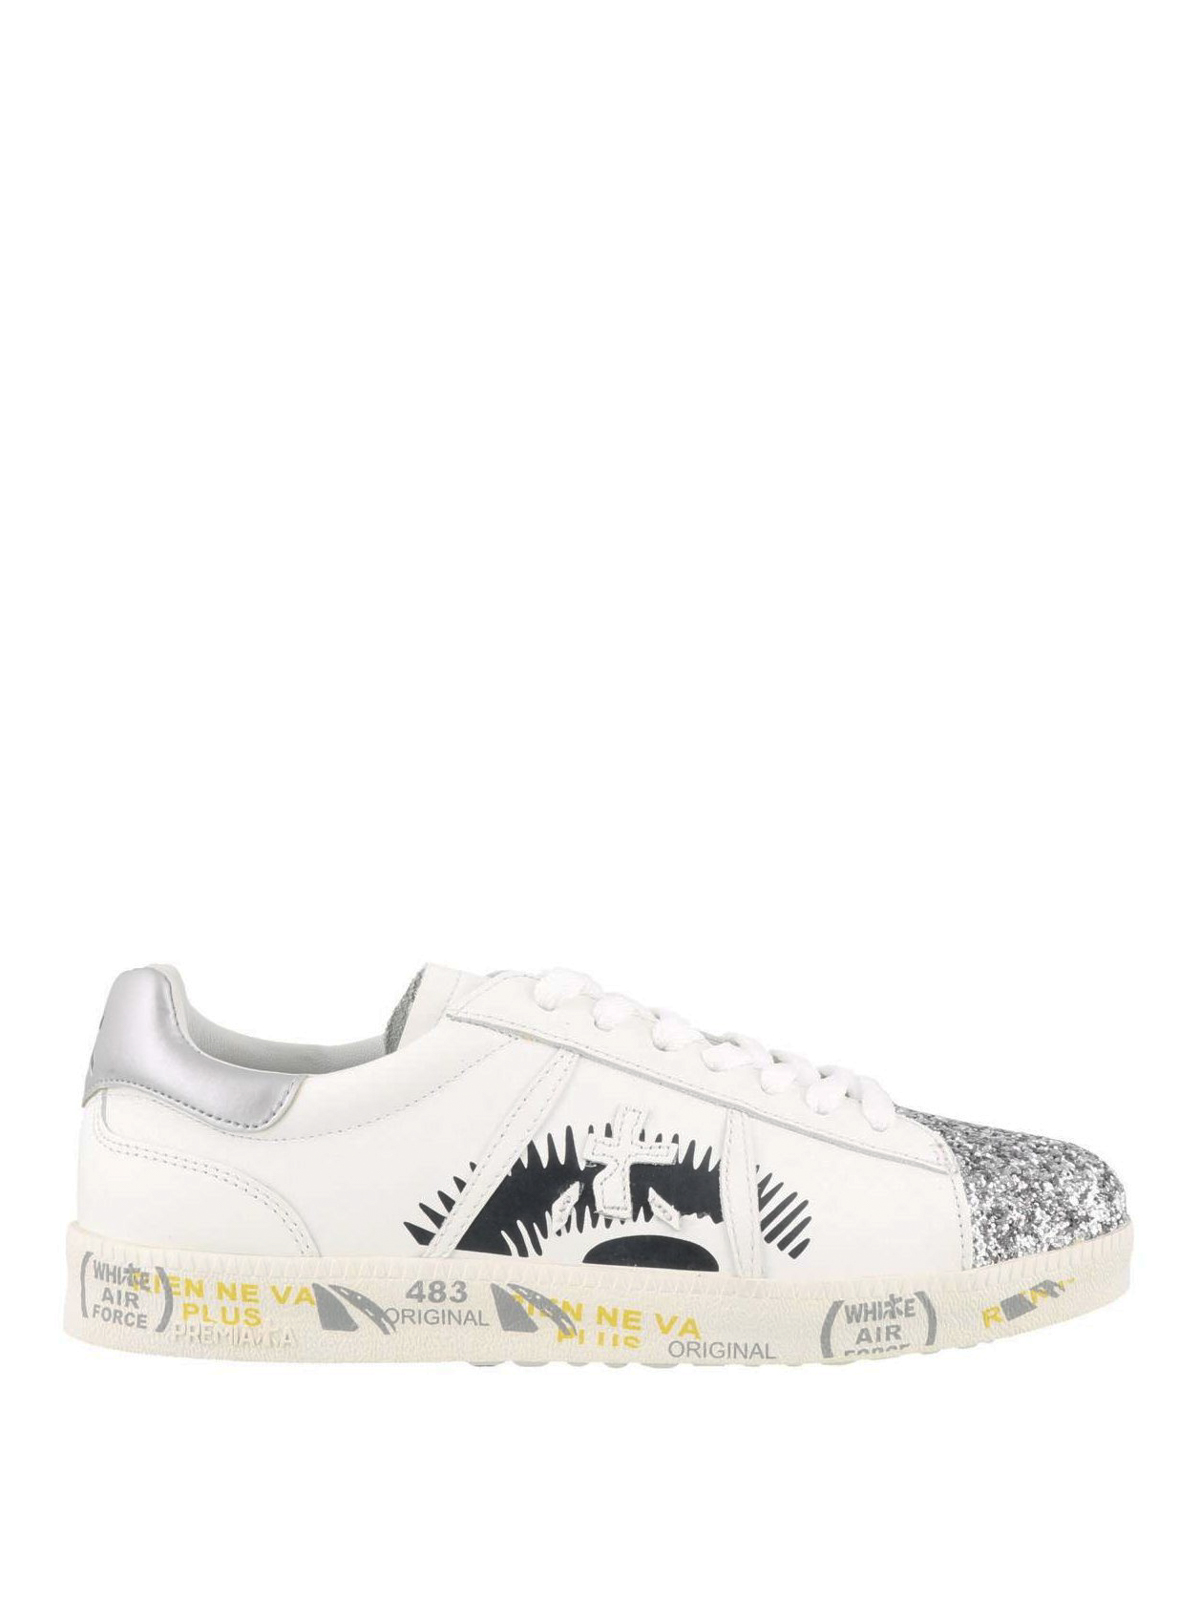 Premiata - Sneaker Andyd bianche con glitter - sneakers - ANDYD3437